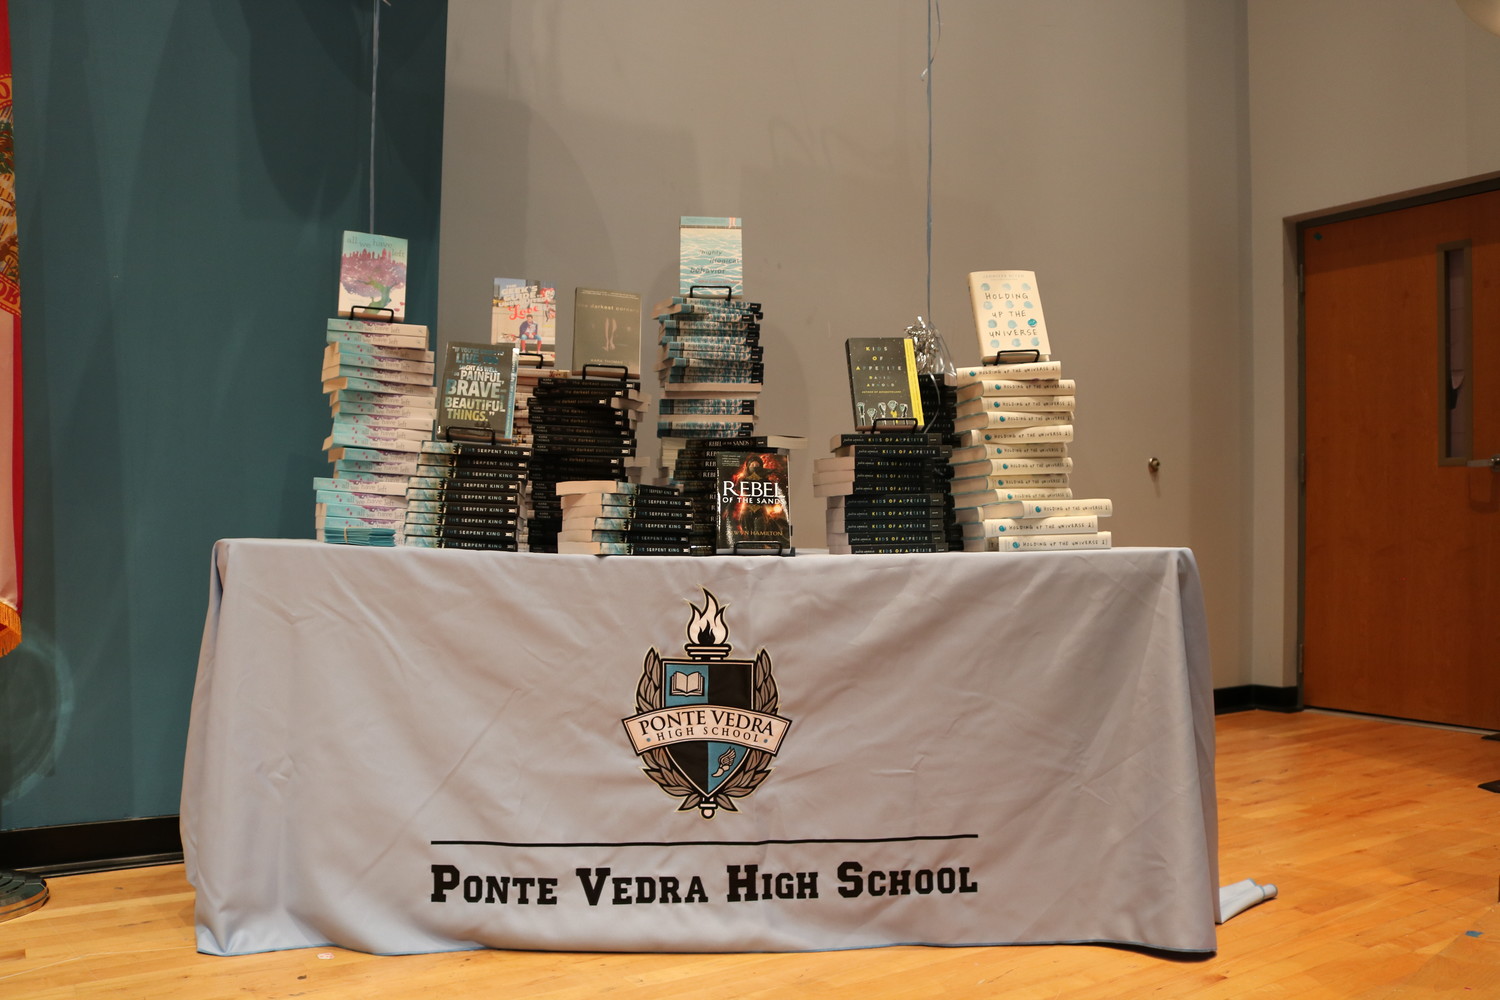 A stand featuring books available for Ponte Vedra High School students at the school library.